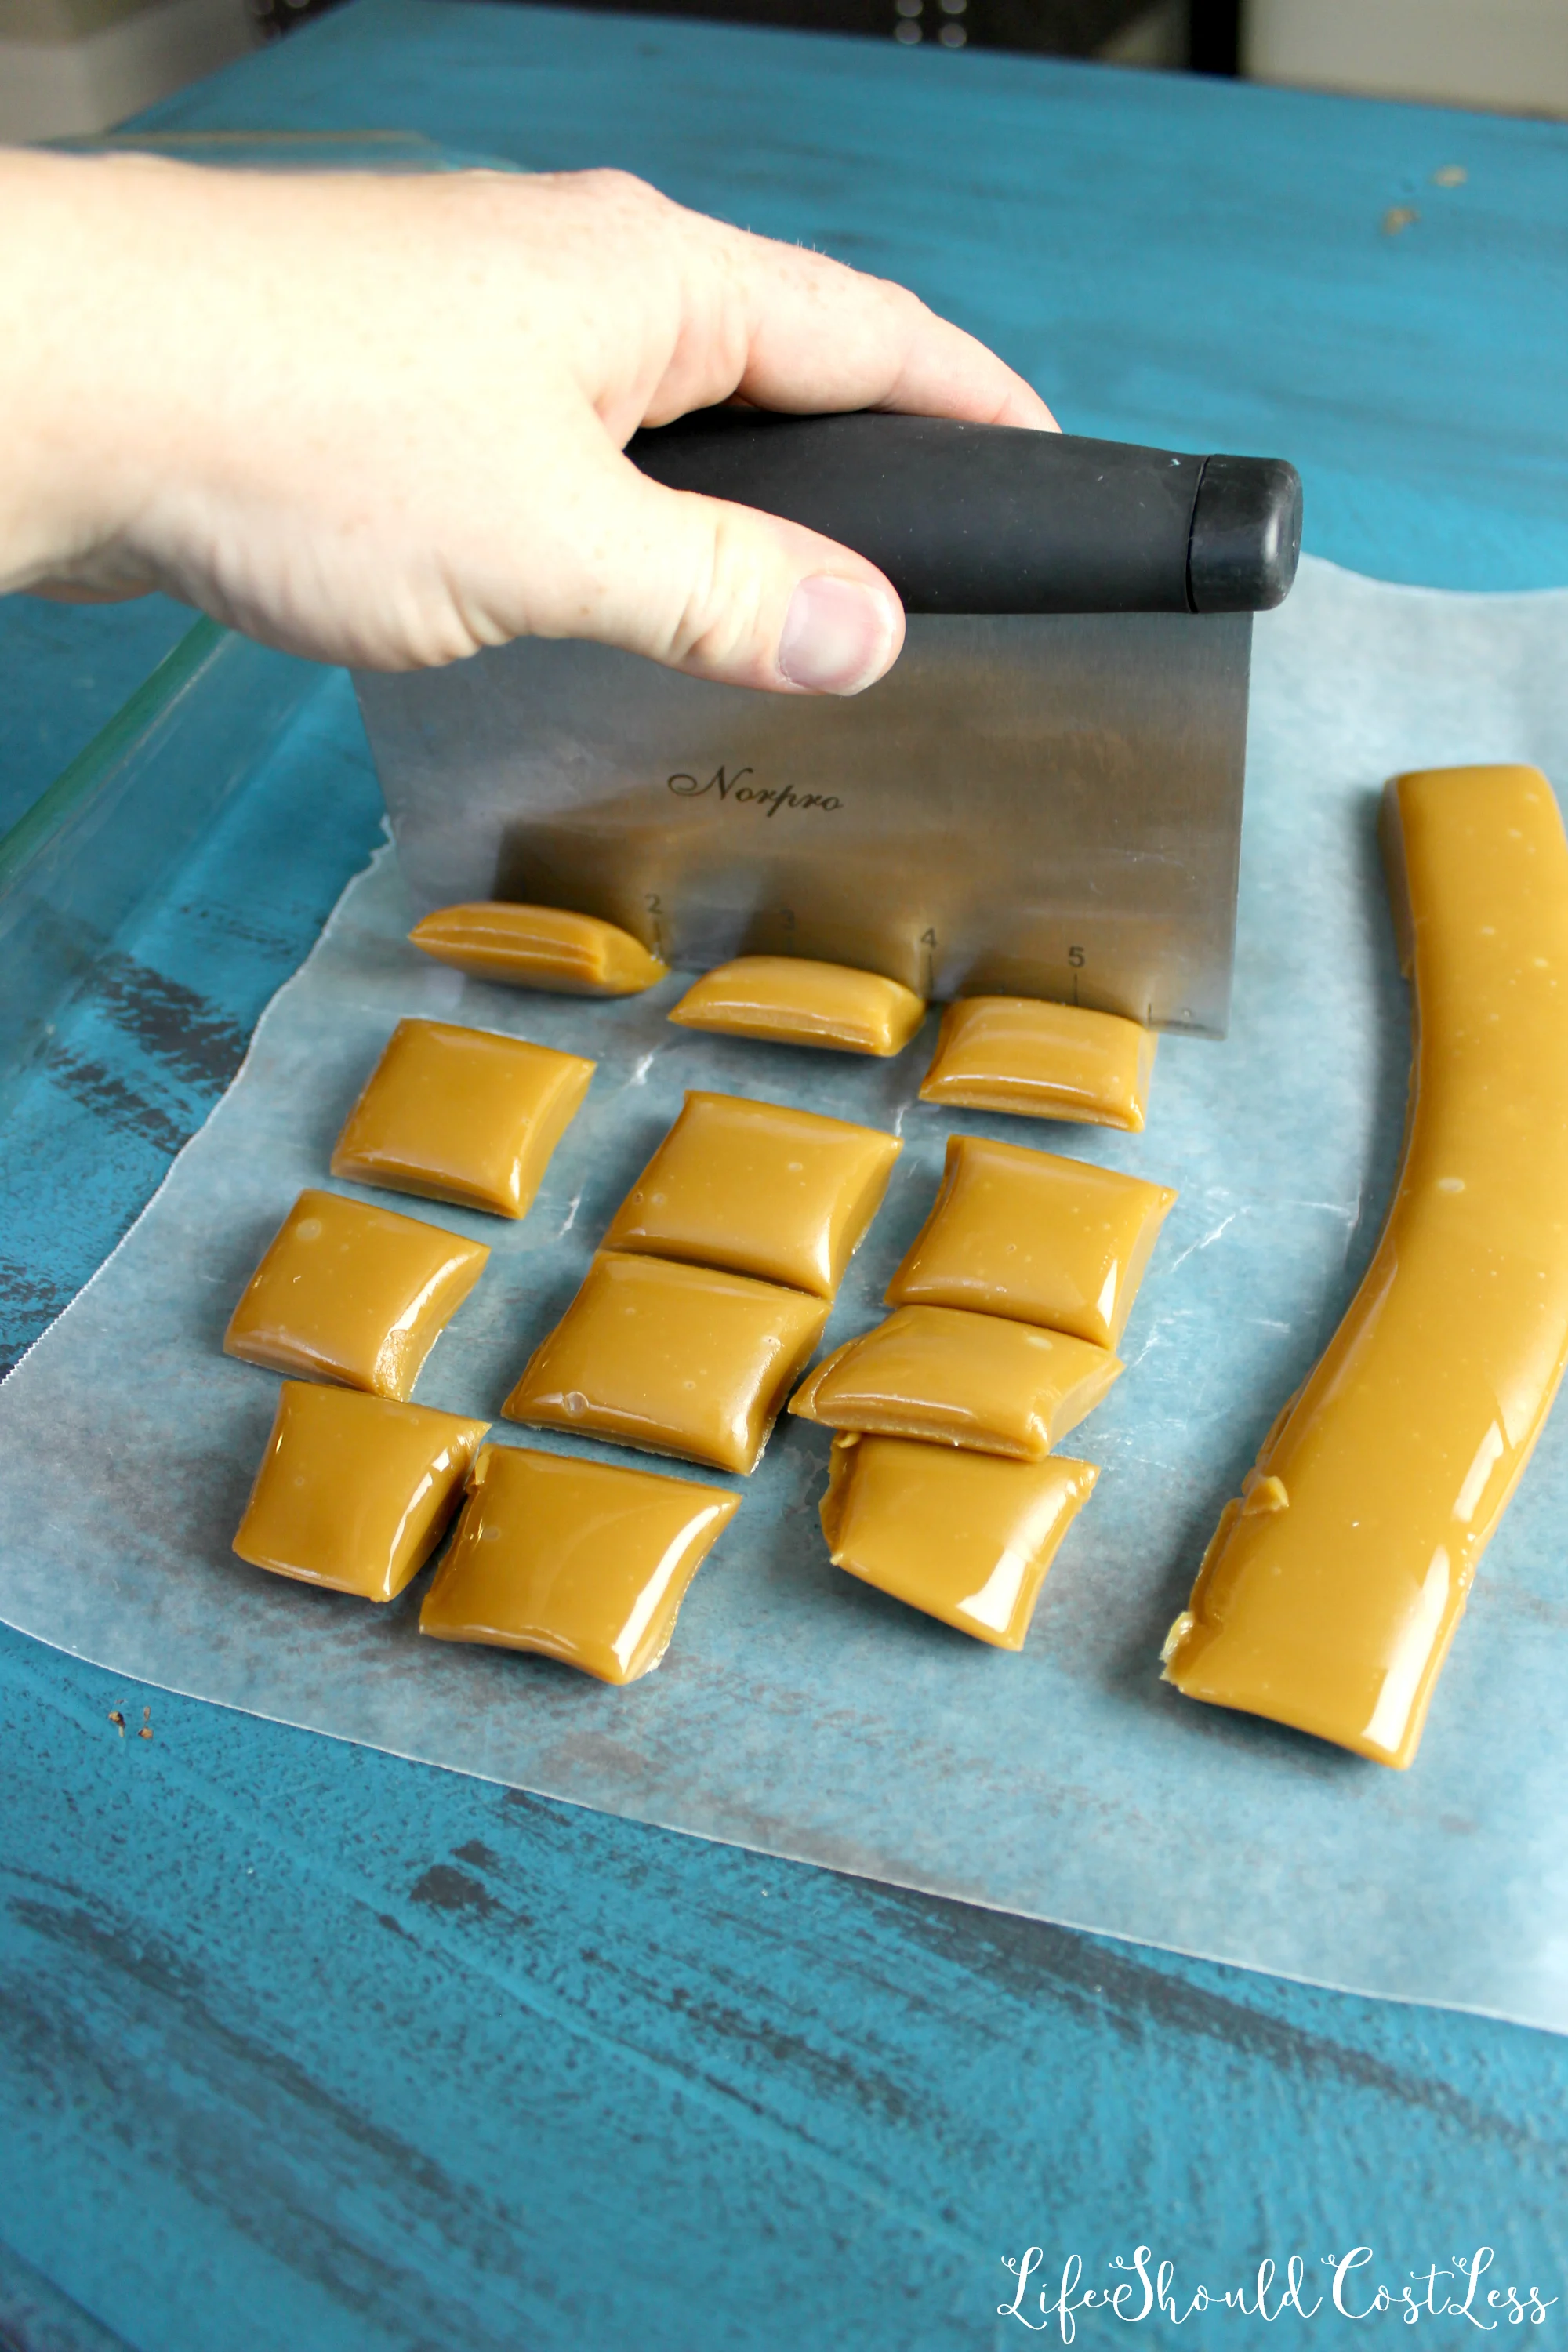 How to cut caramel for old fashioned caramel candies.